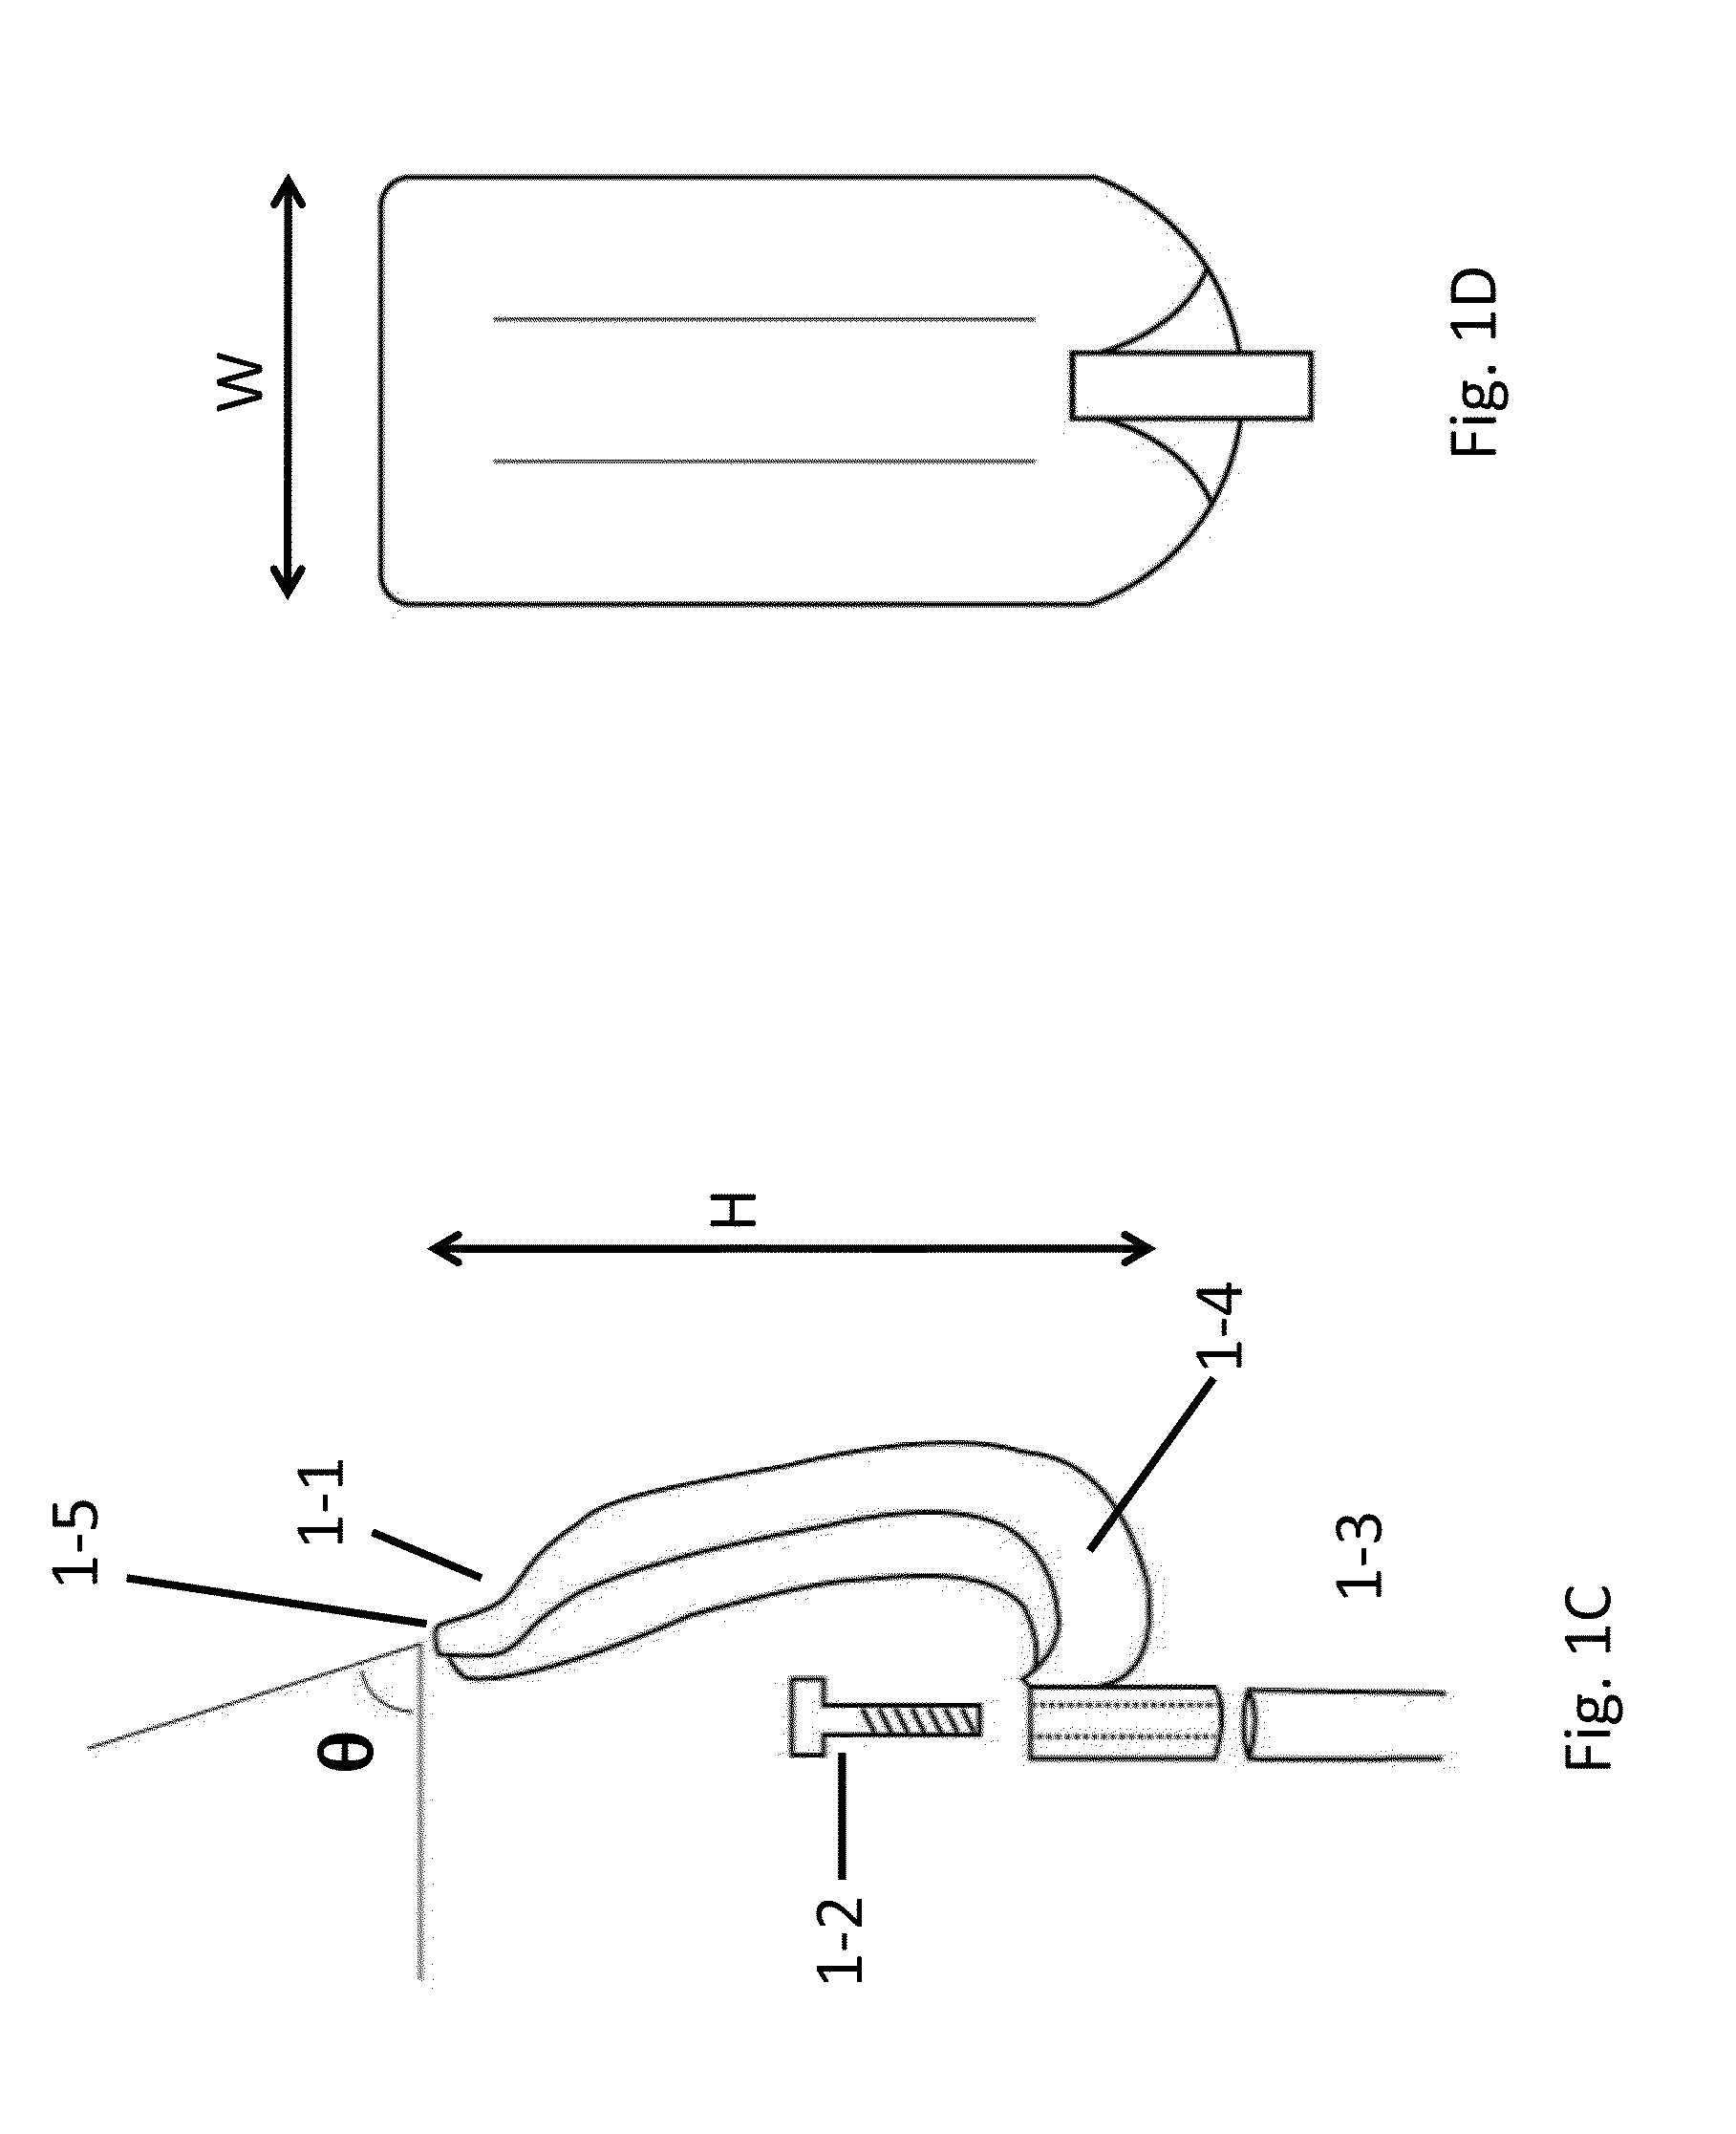 Projectile and throwing apparatus and game for projectile throwing